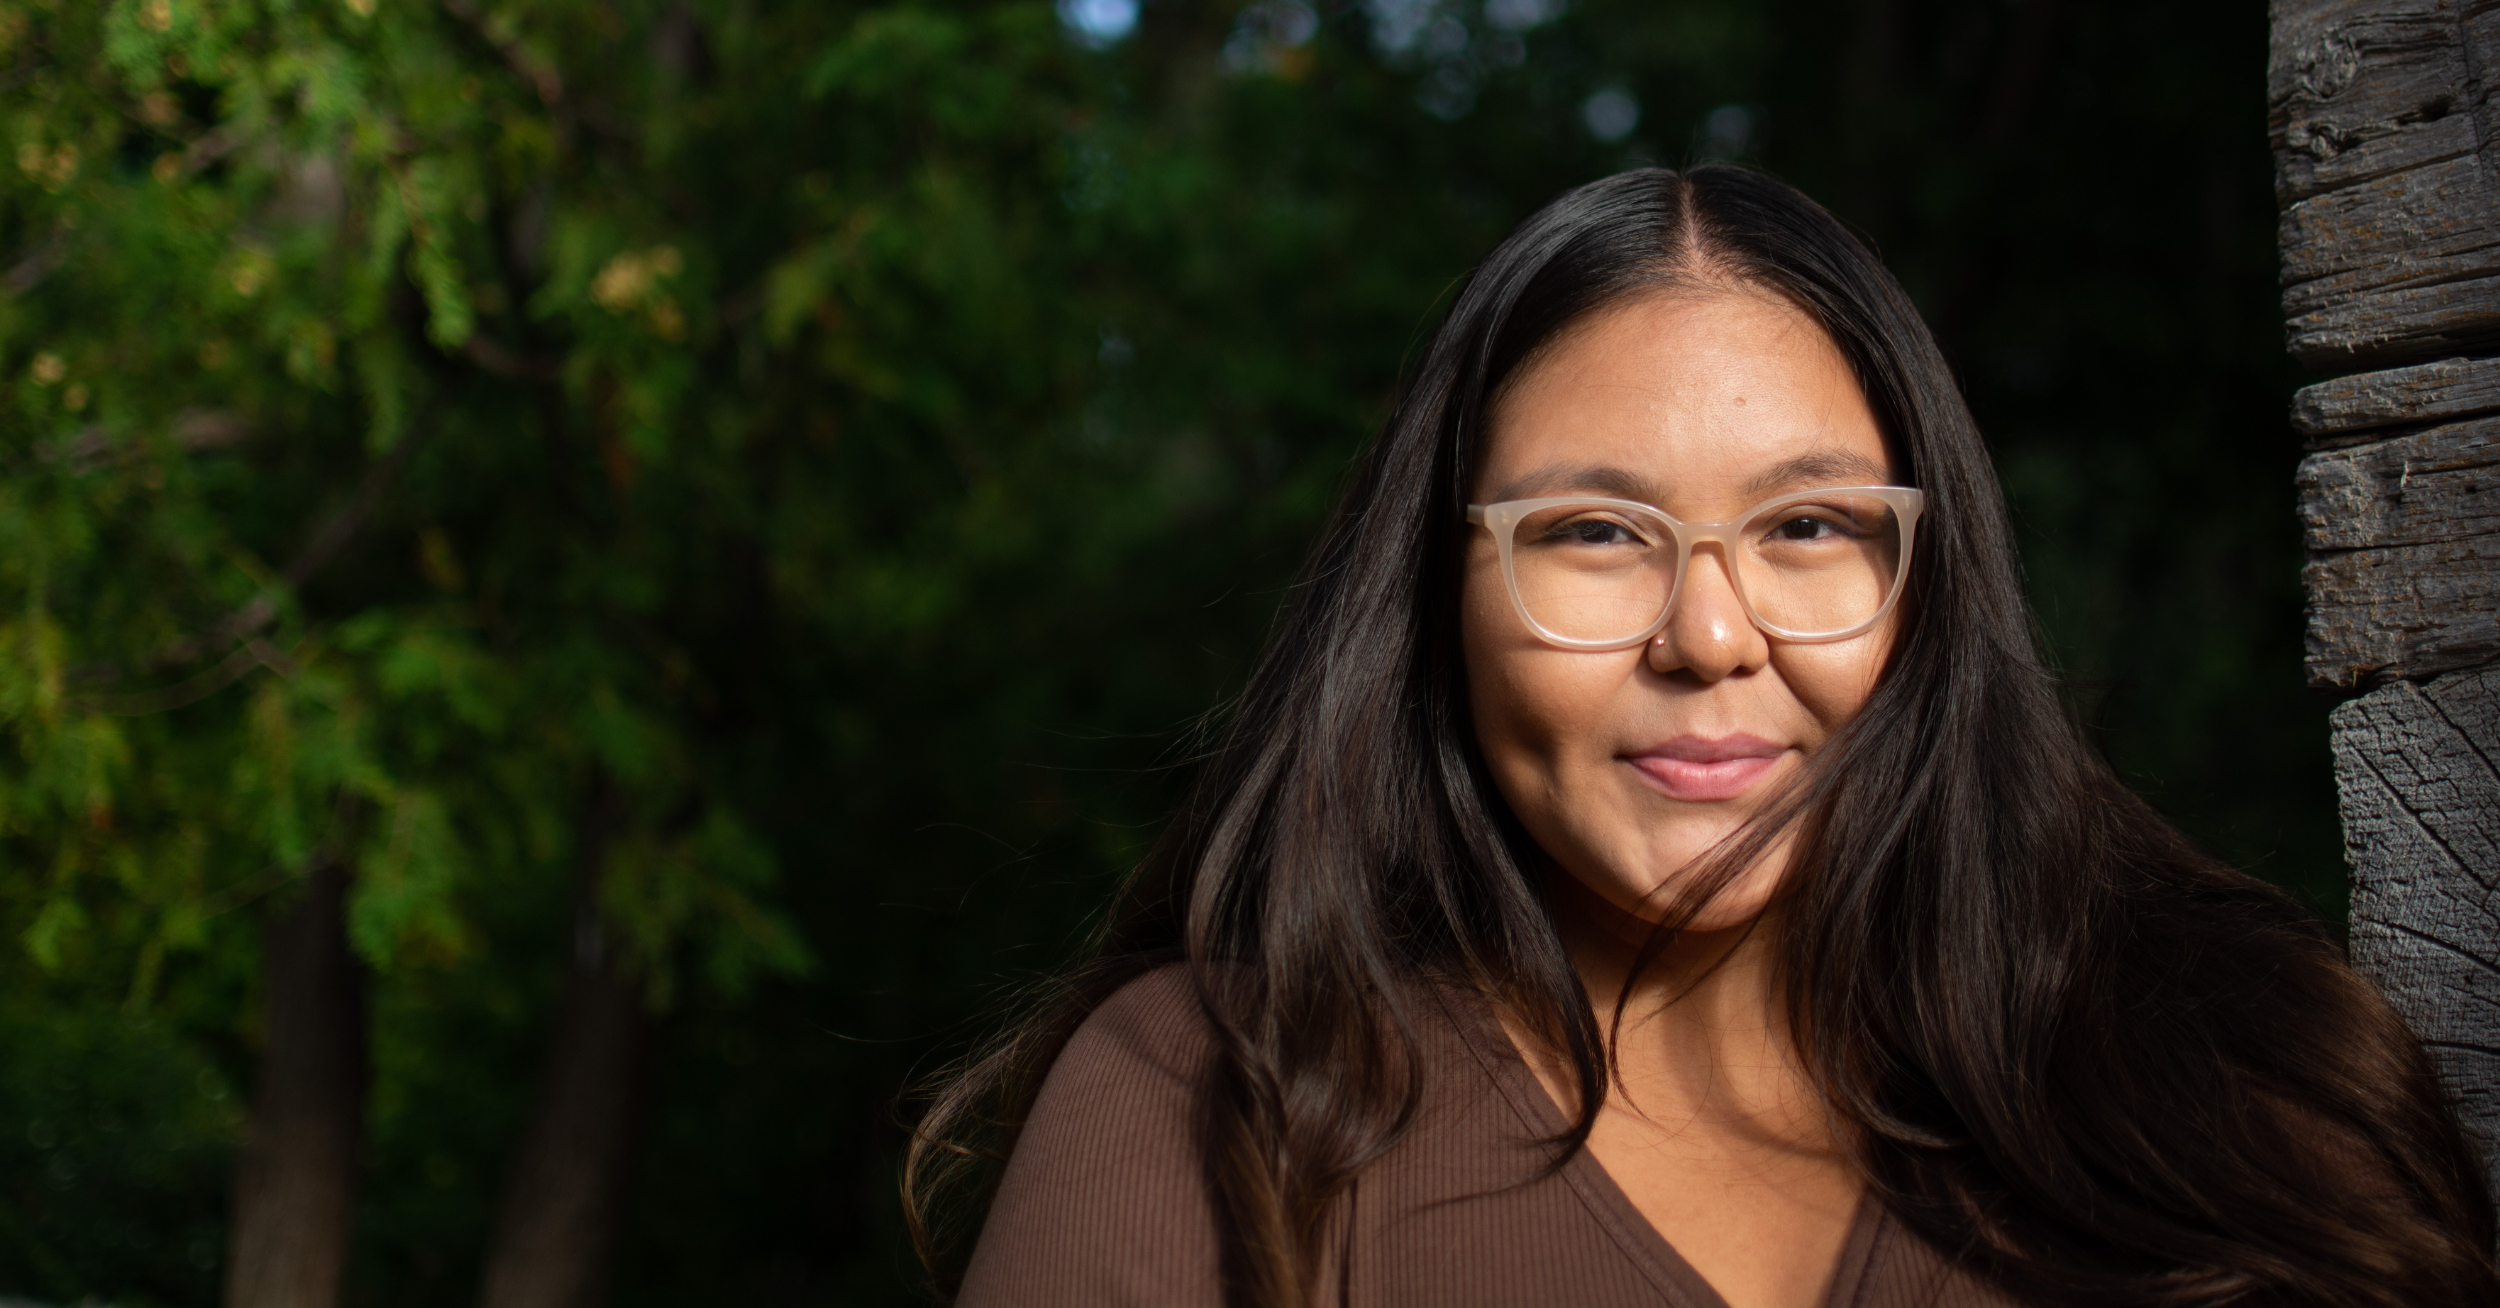 Rainingbird Daniels, a Native American woman, smiles while wearing glasses. Her long brown hair is down and flowing at both shoulders, with greenery in the background.